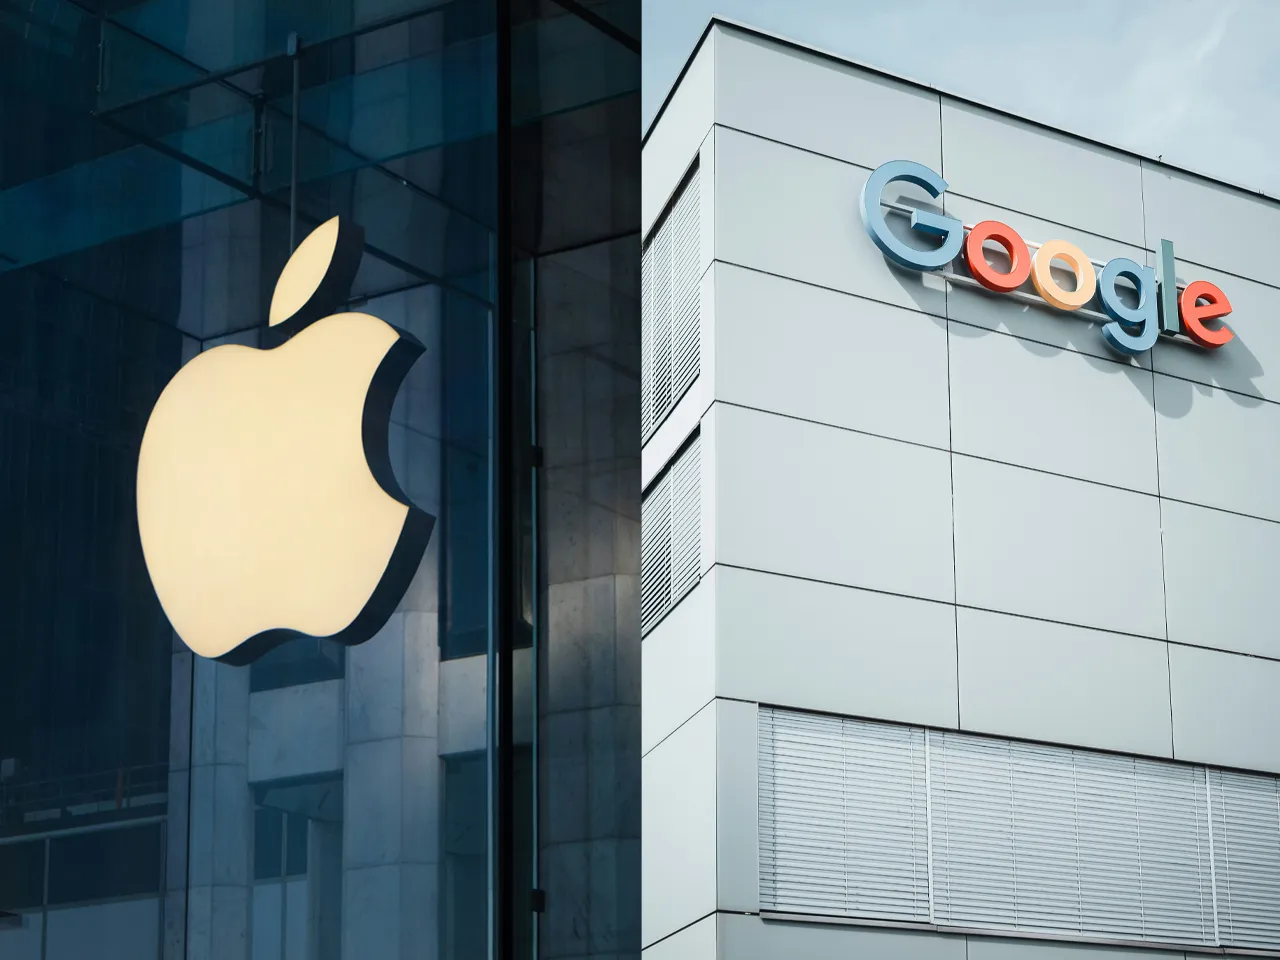 Apple is eyeing a partnership with Google for advanced AI features on iPhones